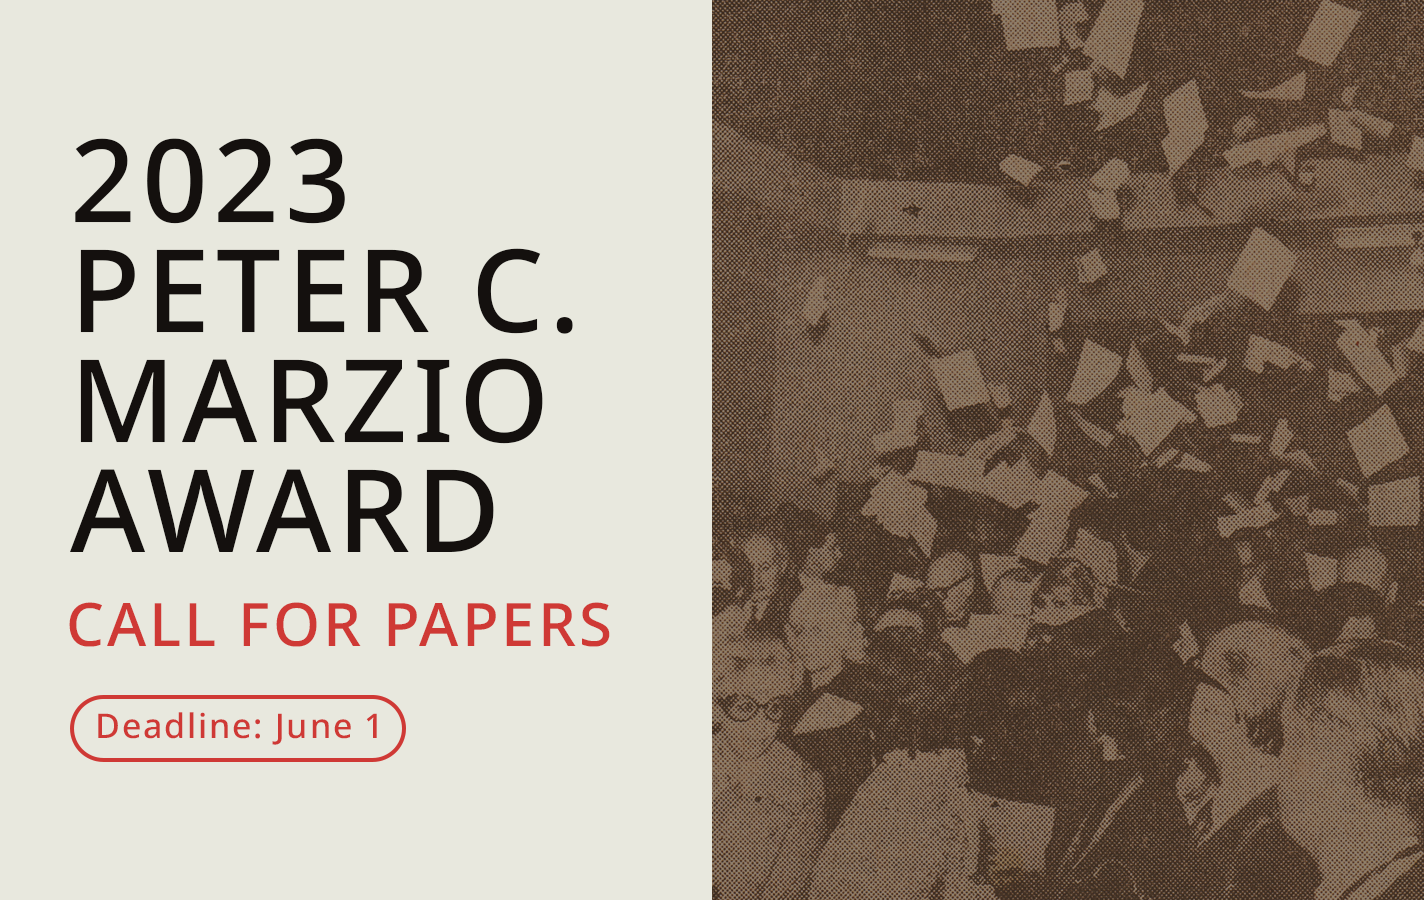 <p><strong>Call for Papers: 2023 Peter C. Marzio Award</strong></p>
